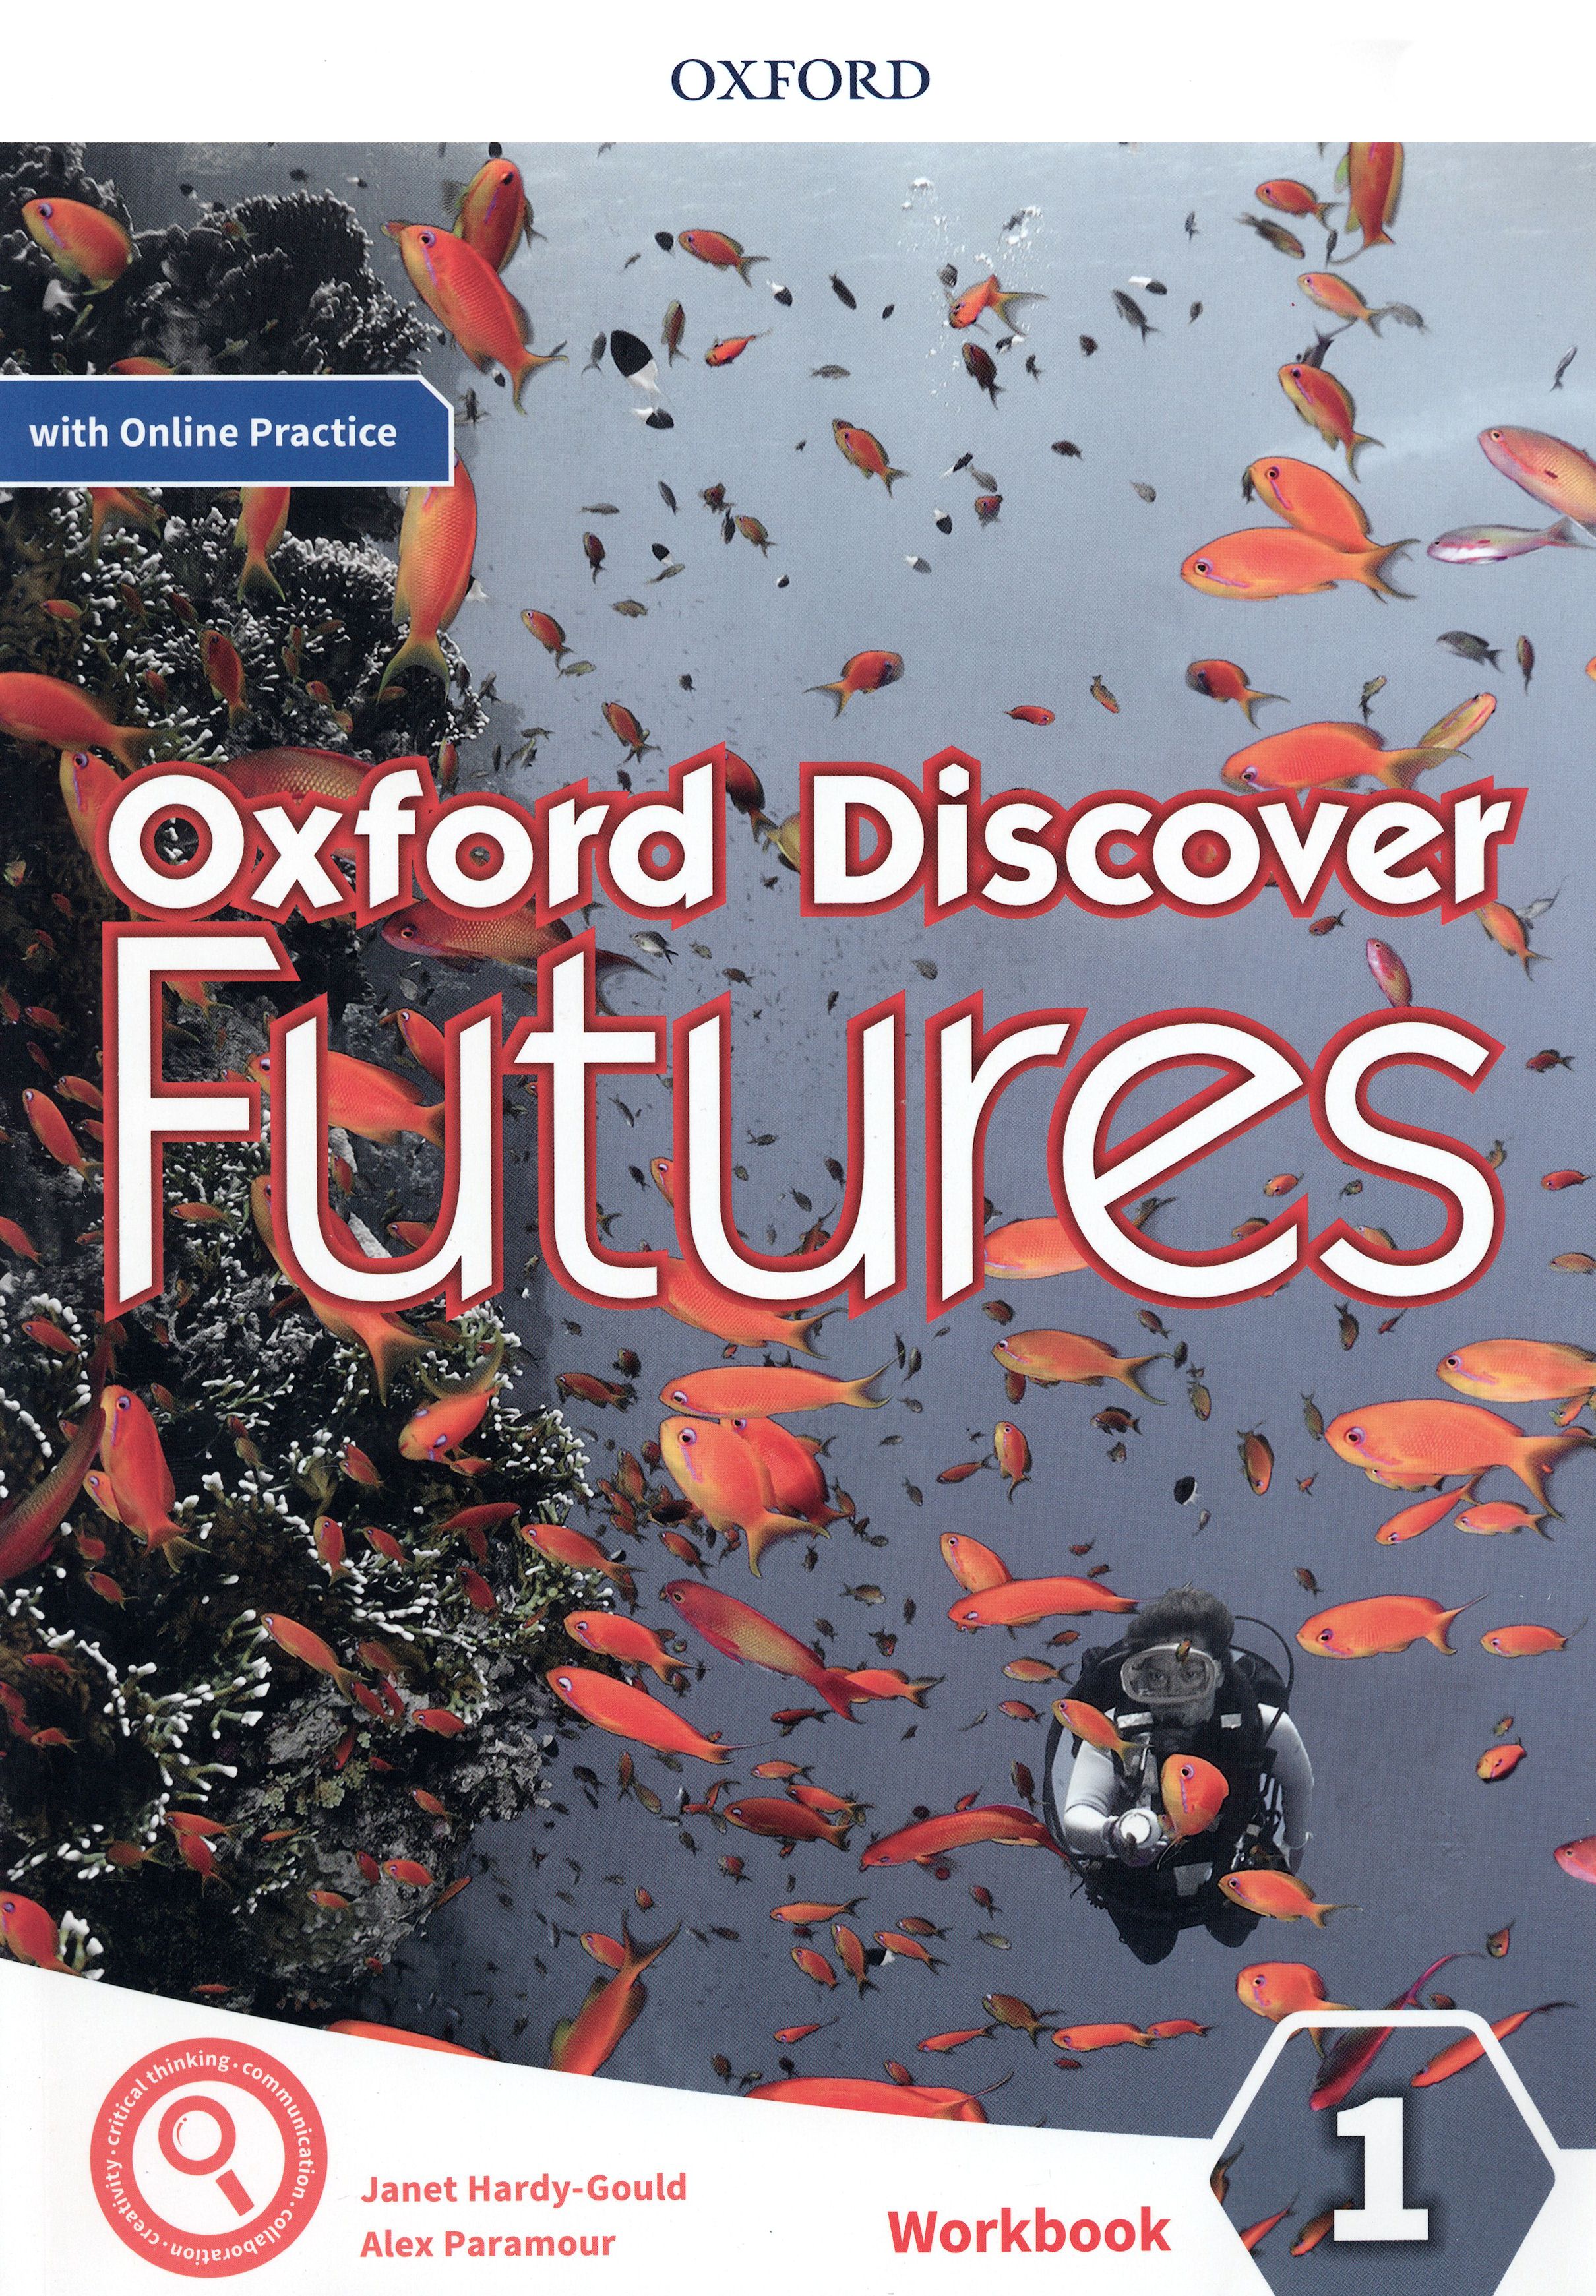 Oxford Futures 1 Workbook. Oxford discover Futures 4 Workbook. Oxford discover Futures. Oxford discover Futures 1. Oxford discover book